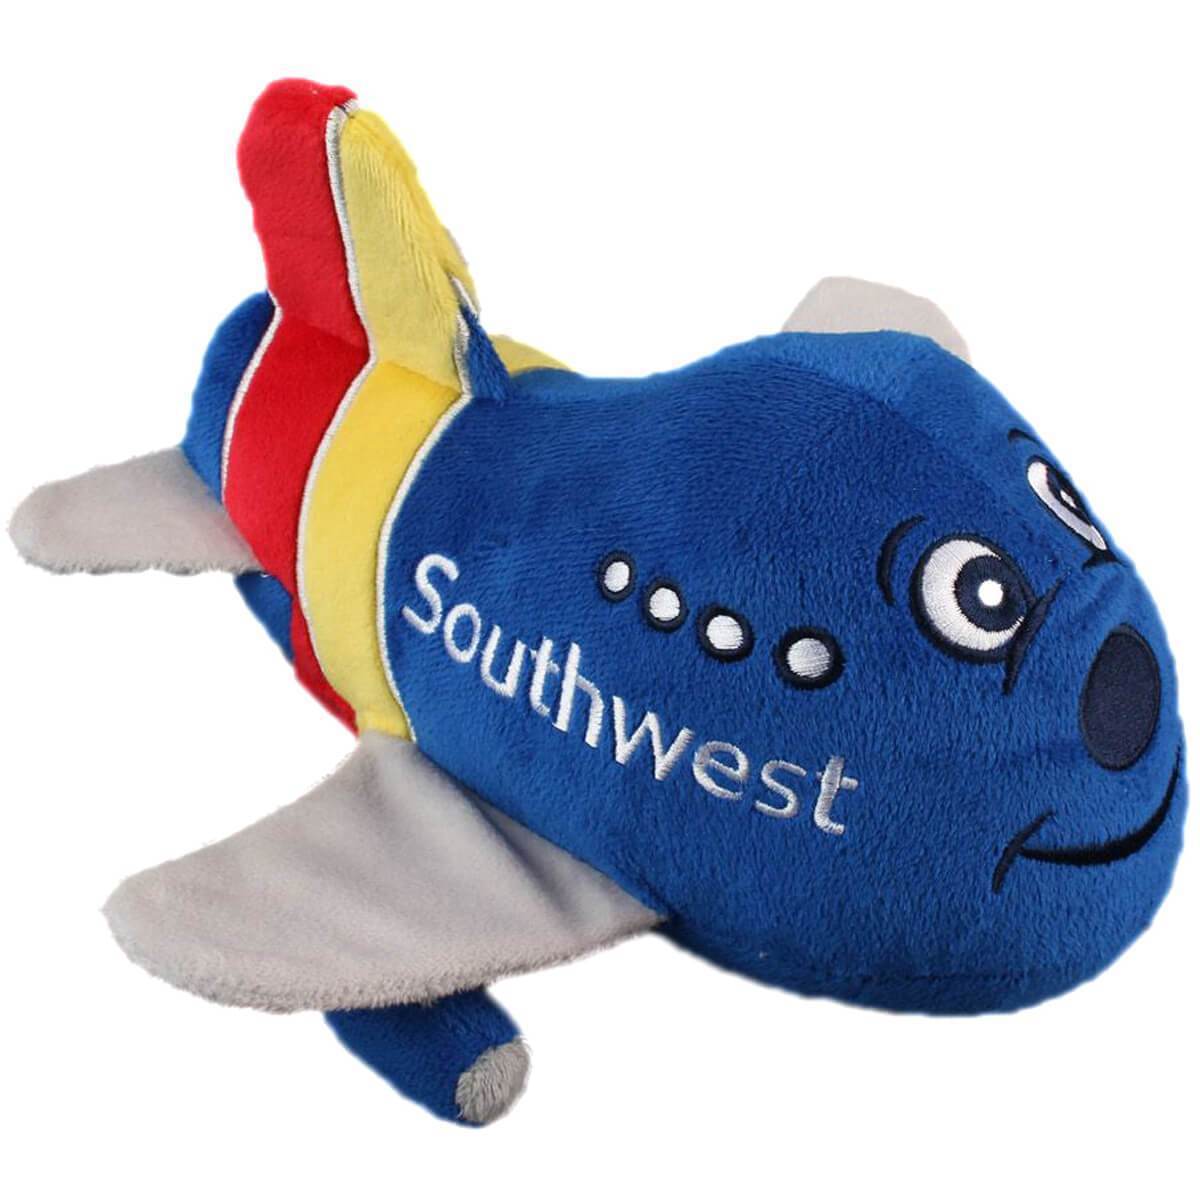 DaRon Southwest Airlines Plush Toy Airplane with Sound